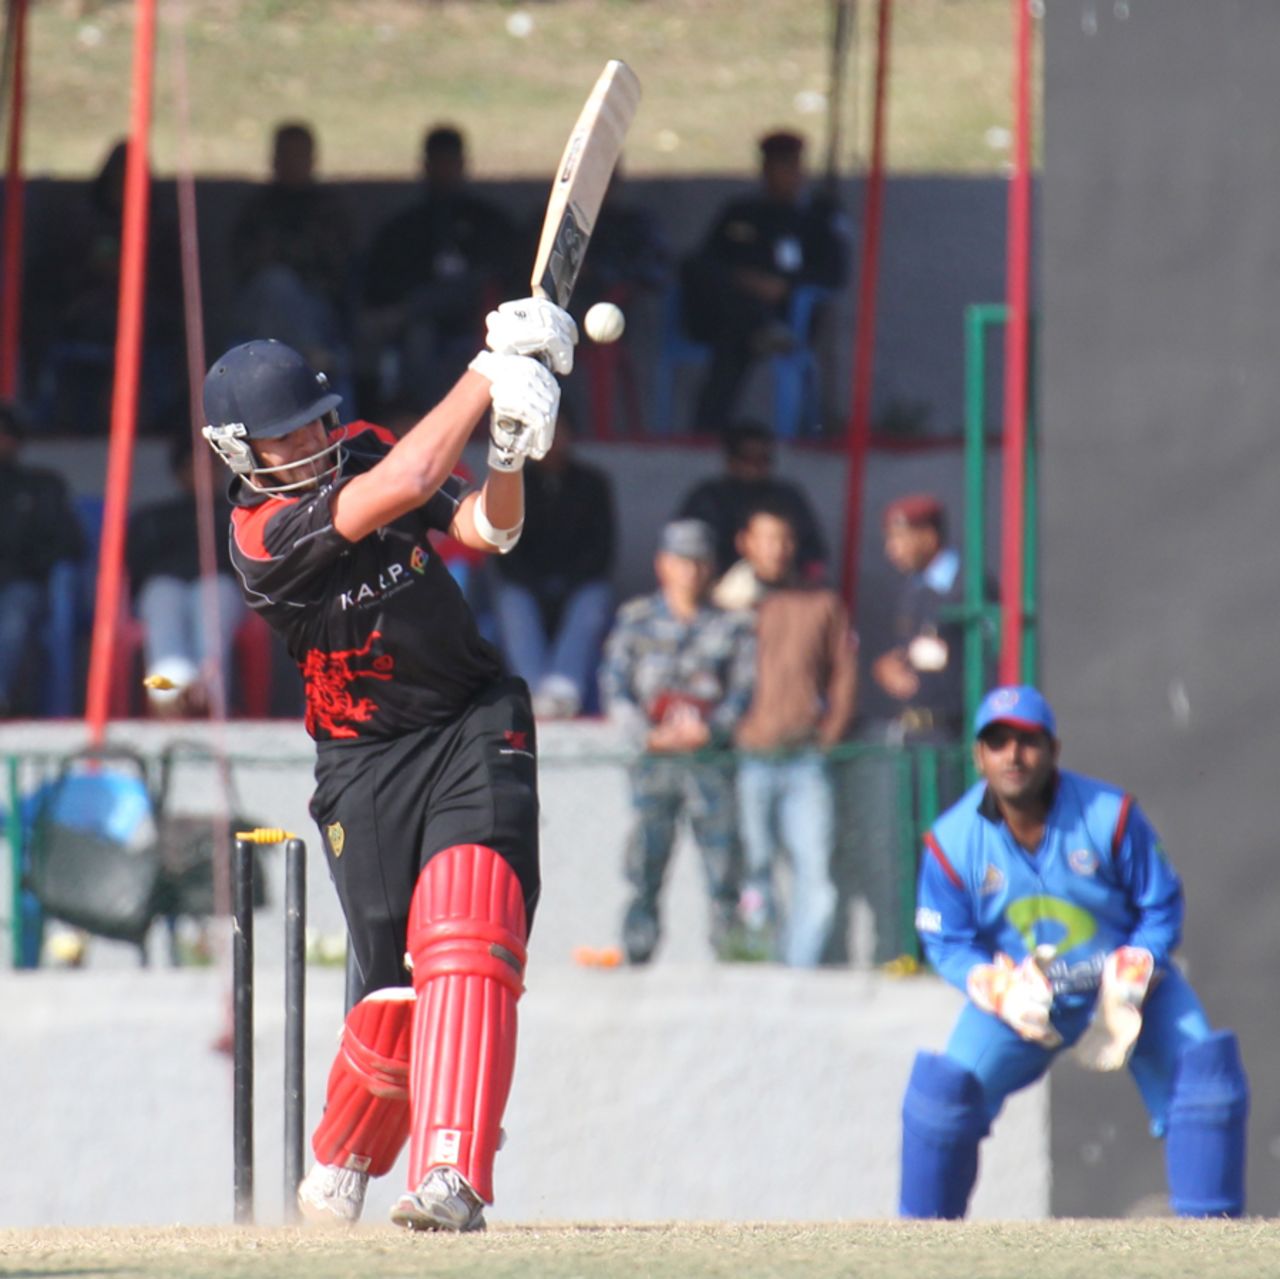 Courtney Kruger is bowled in the ACC Twenty20 Cup 2011 final against Afghanistan in Kathmandu on 11th December 2011